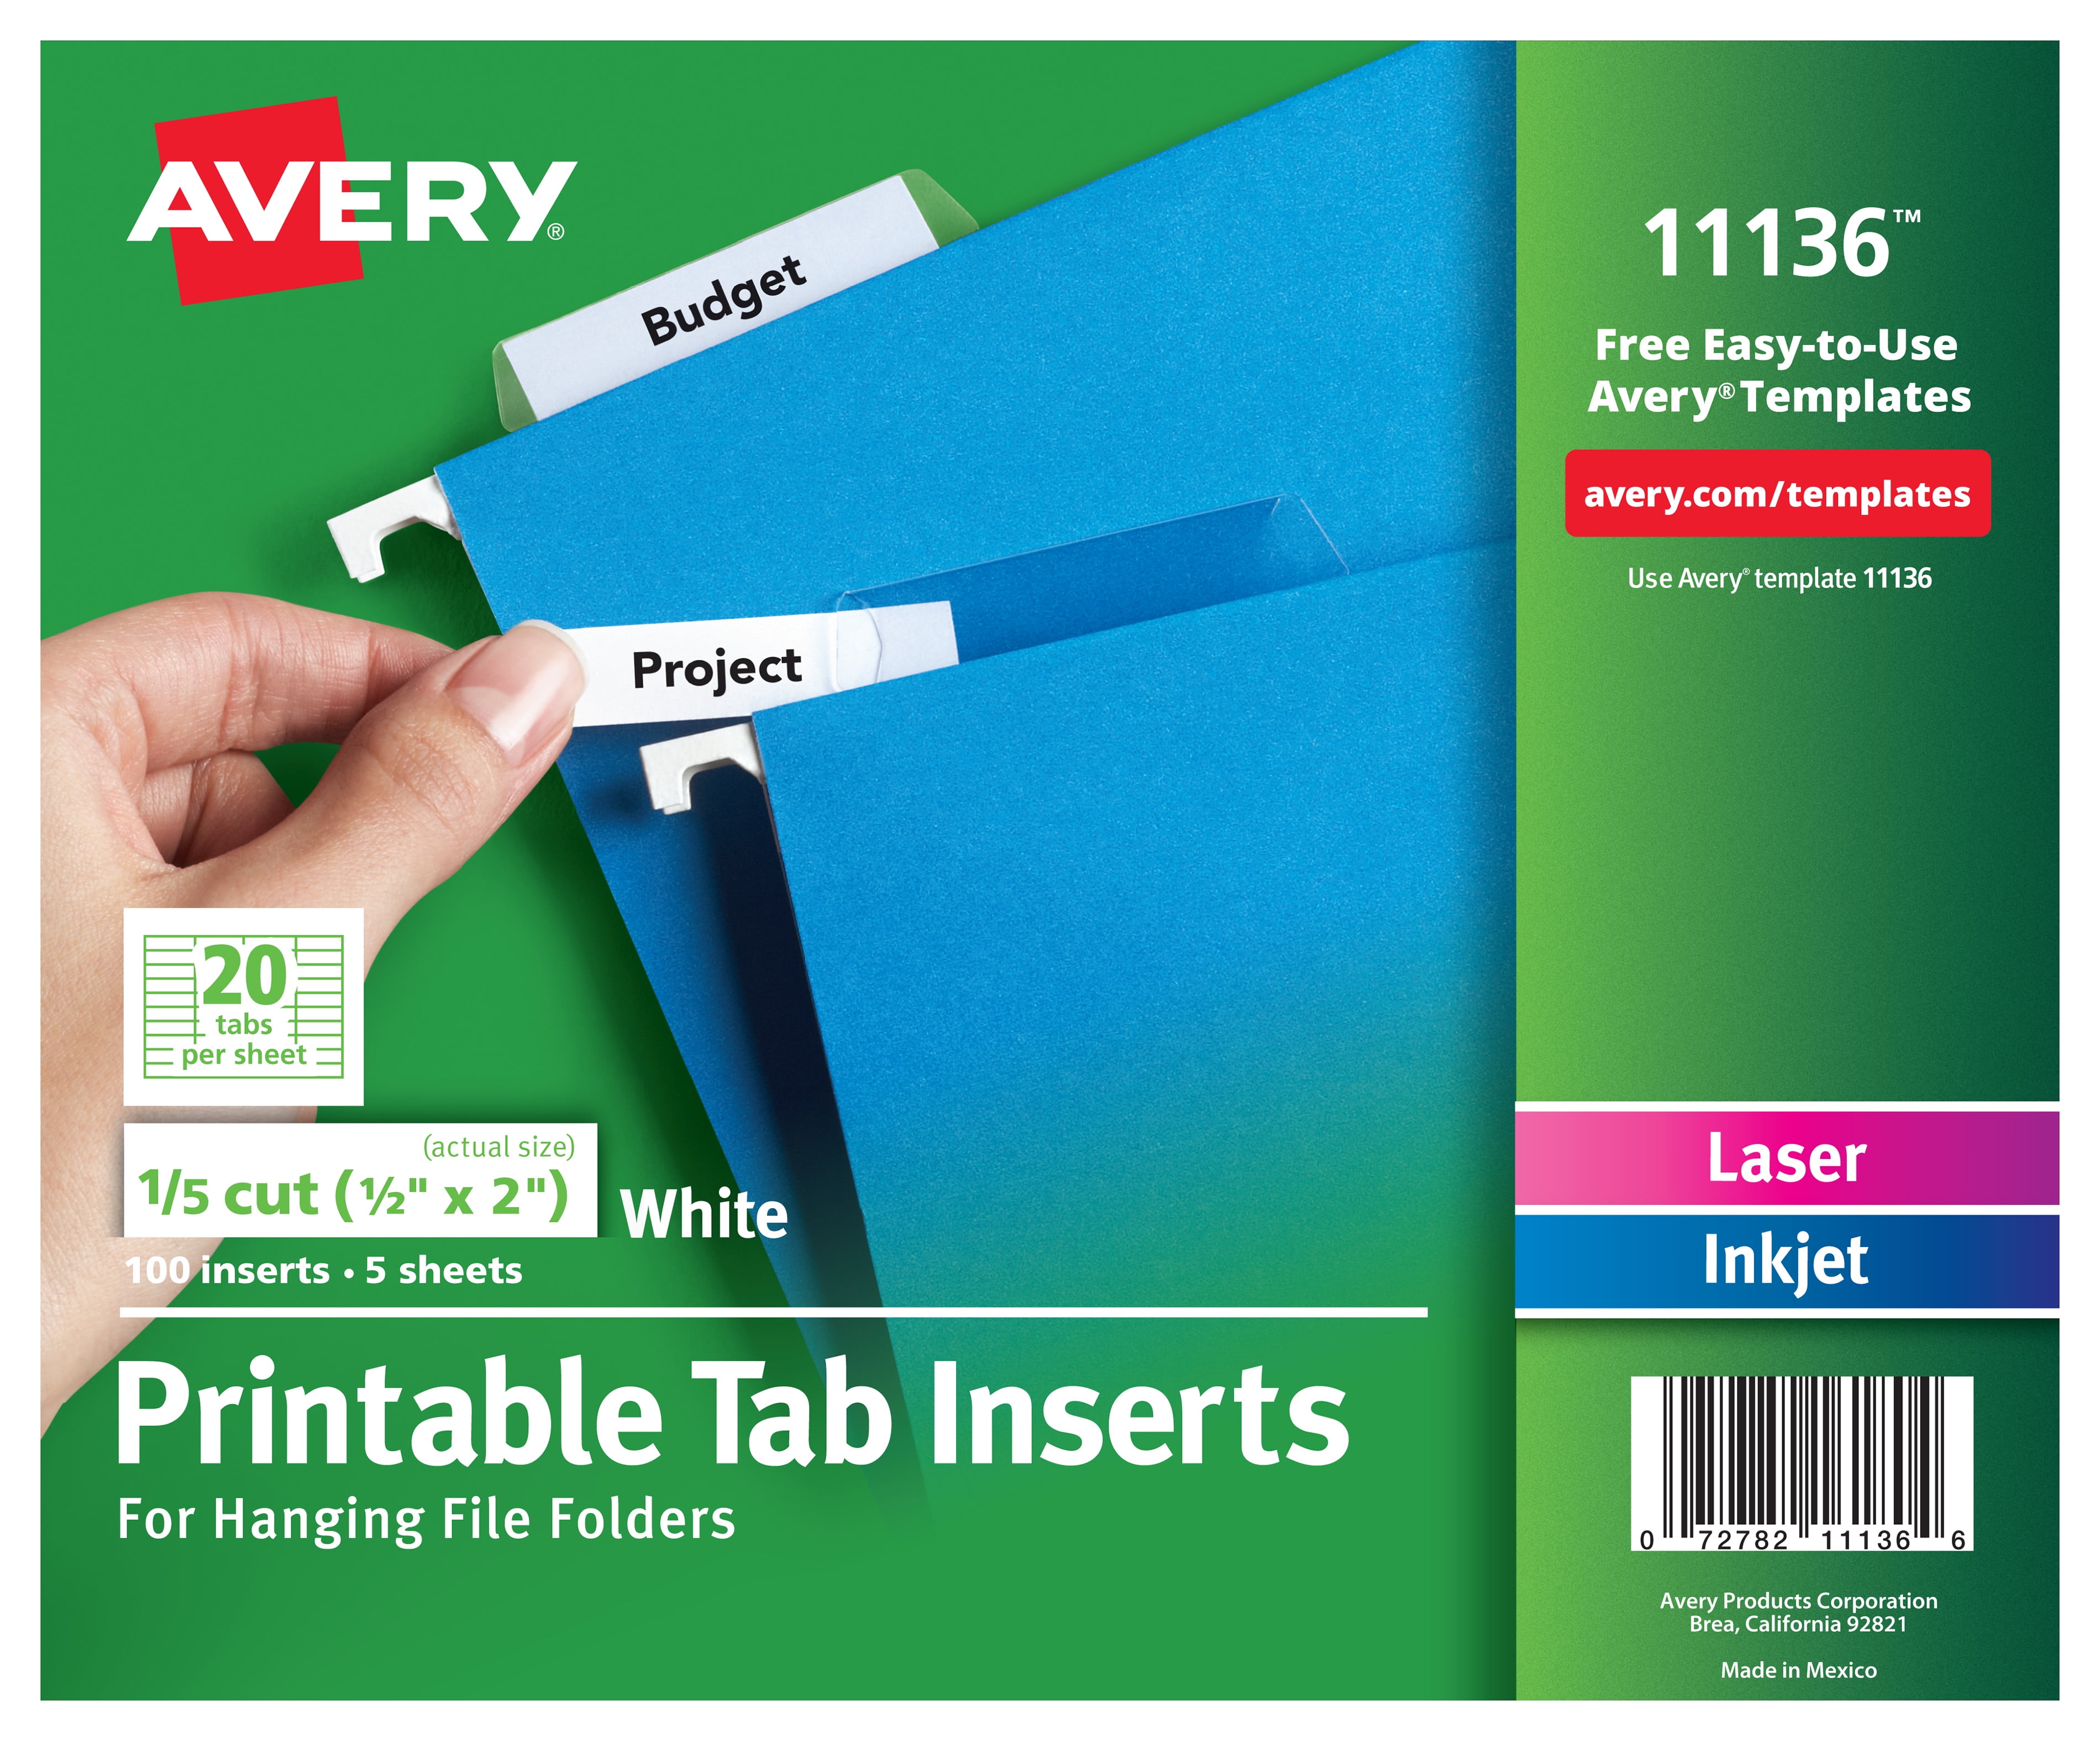 avery-printable-tab-inserts-for-hanging-file-folders-1-5-cut-2-pack